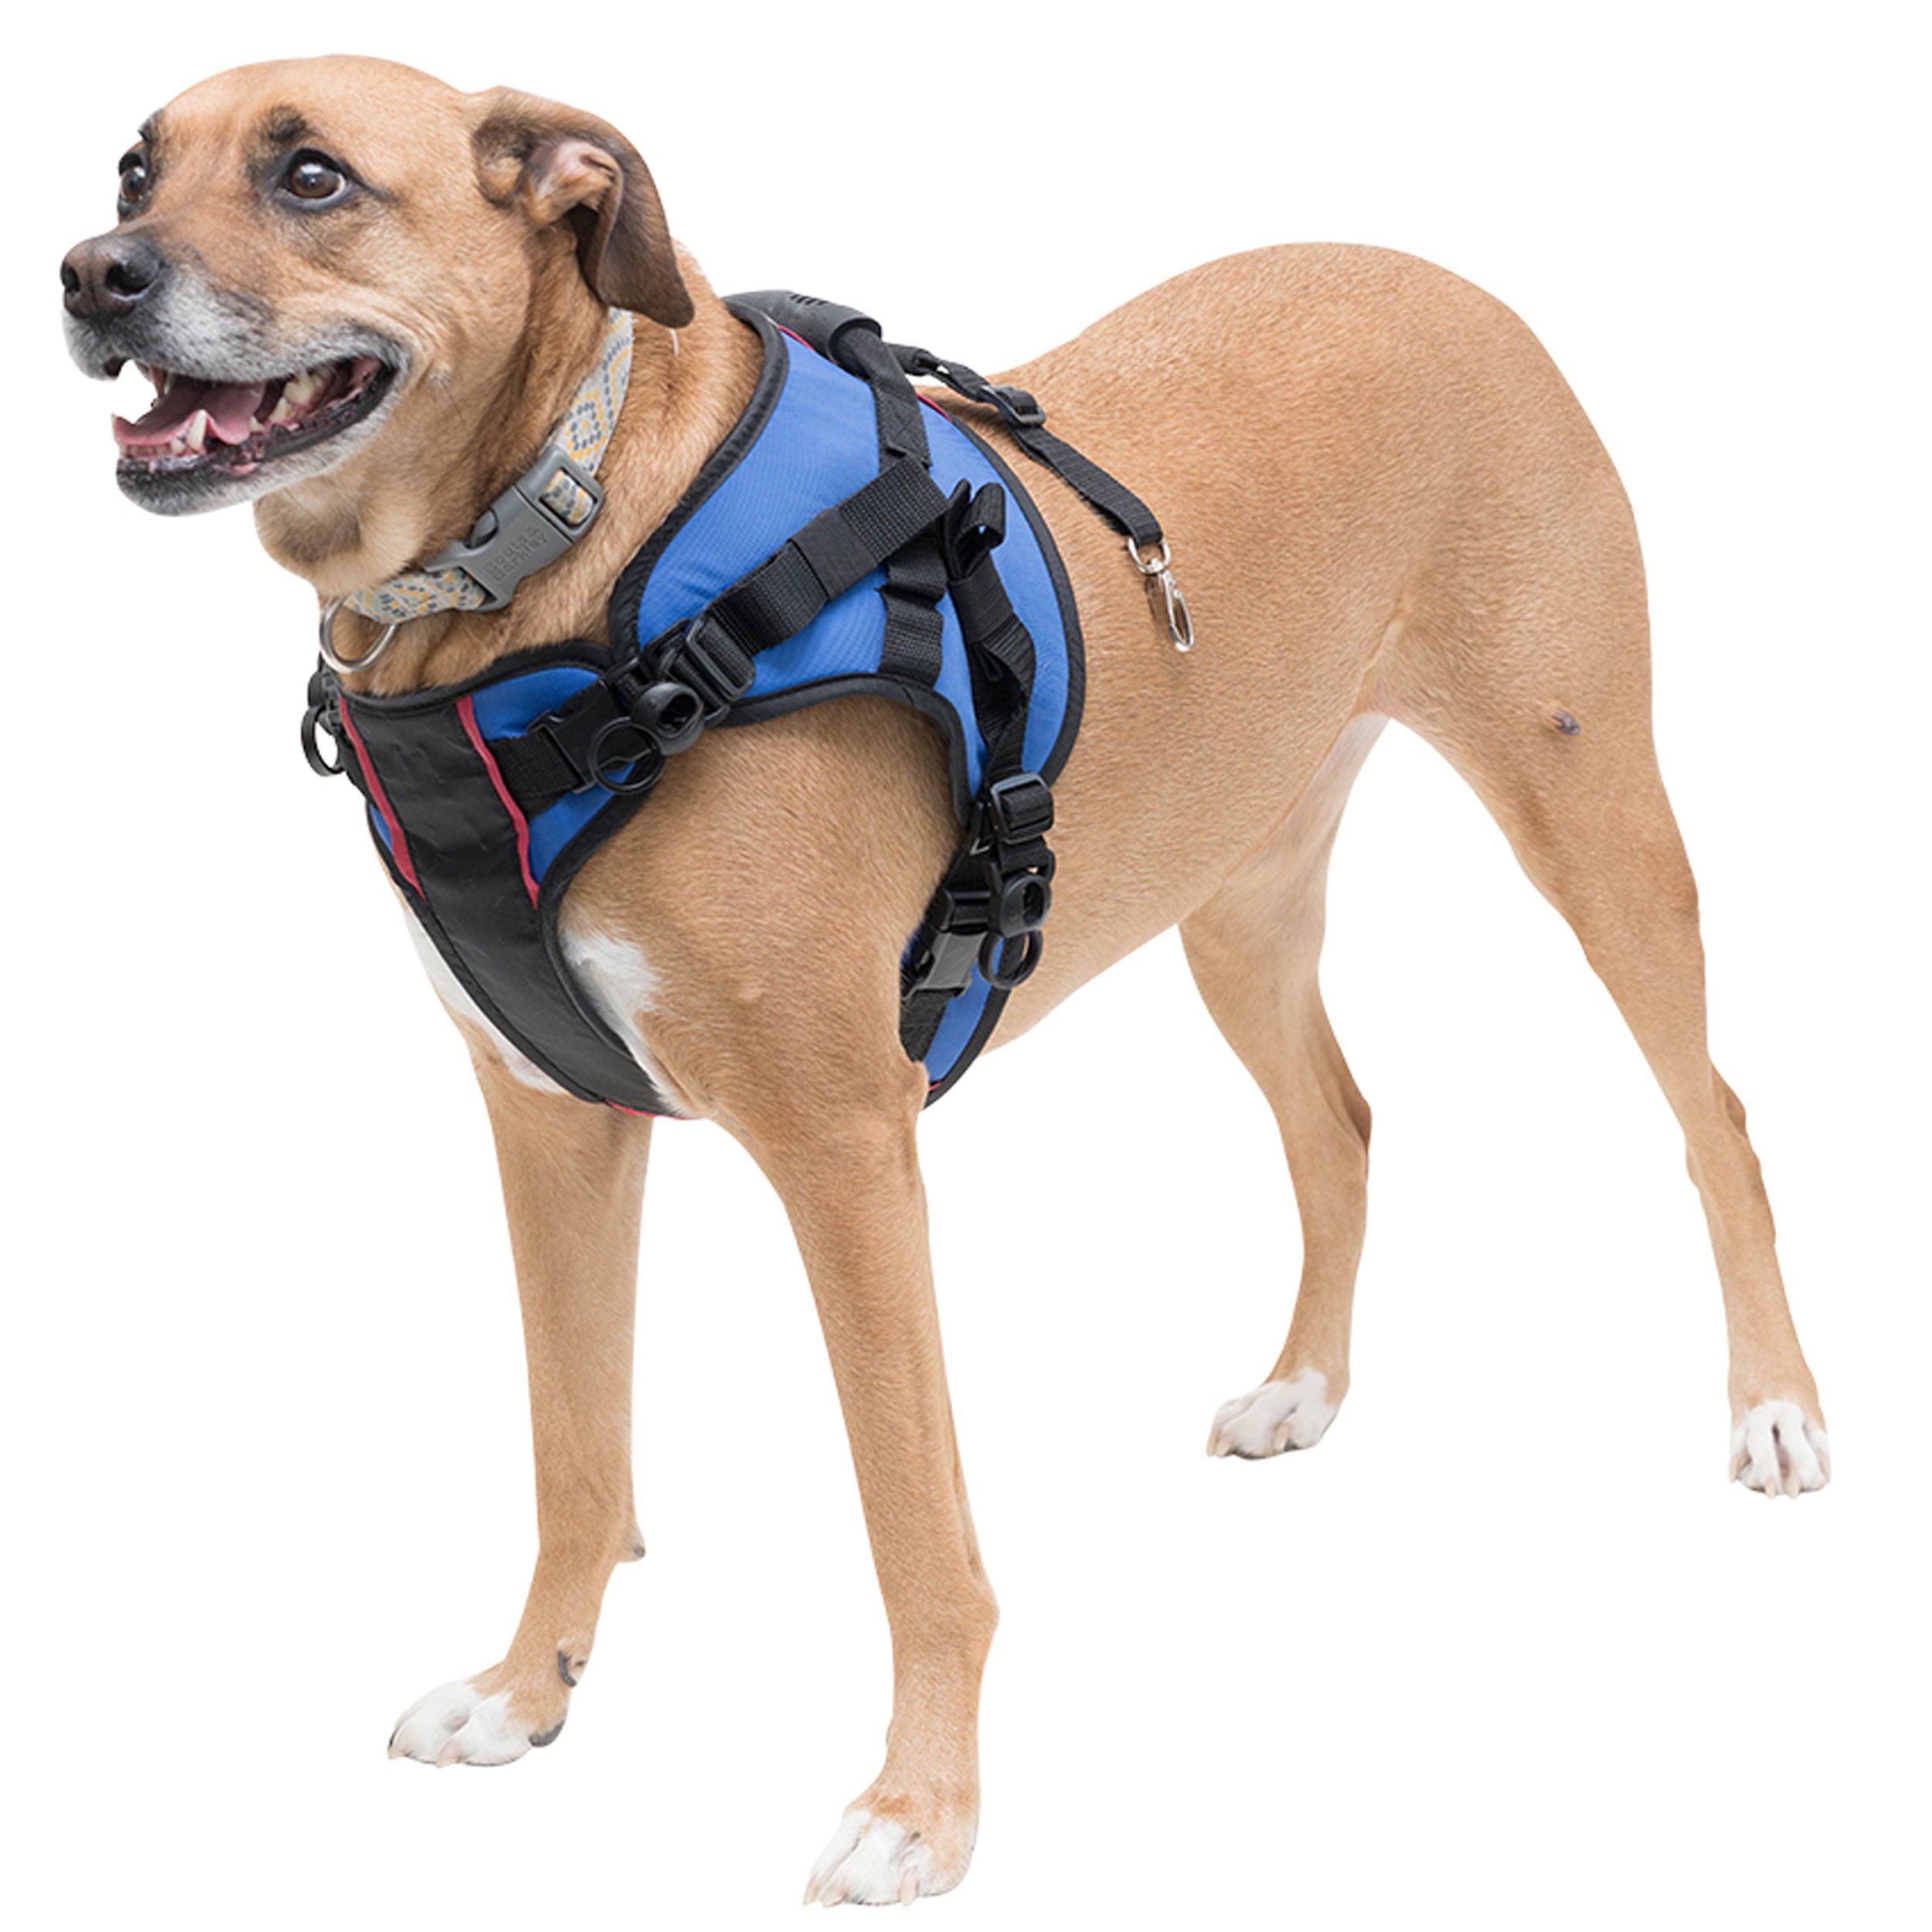 Top 10 Front Harness Dog Products Reviewed and Rated – Your Ultimate ...